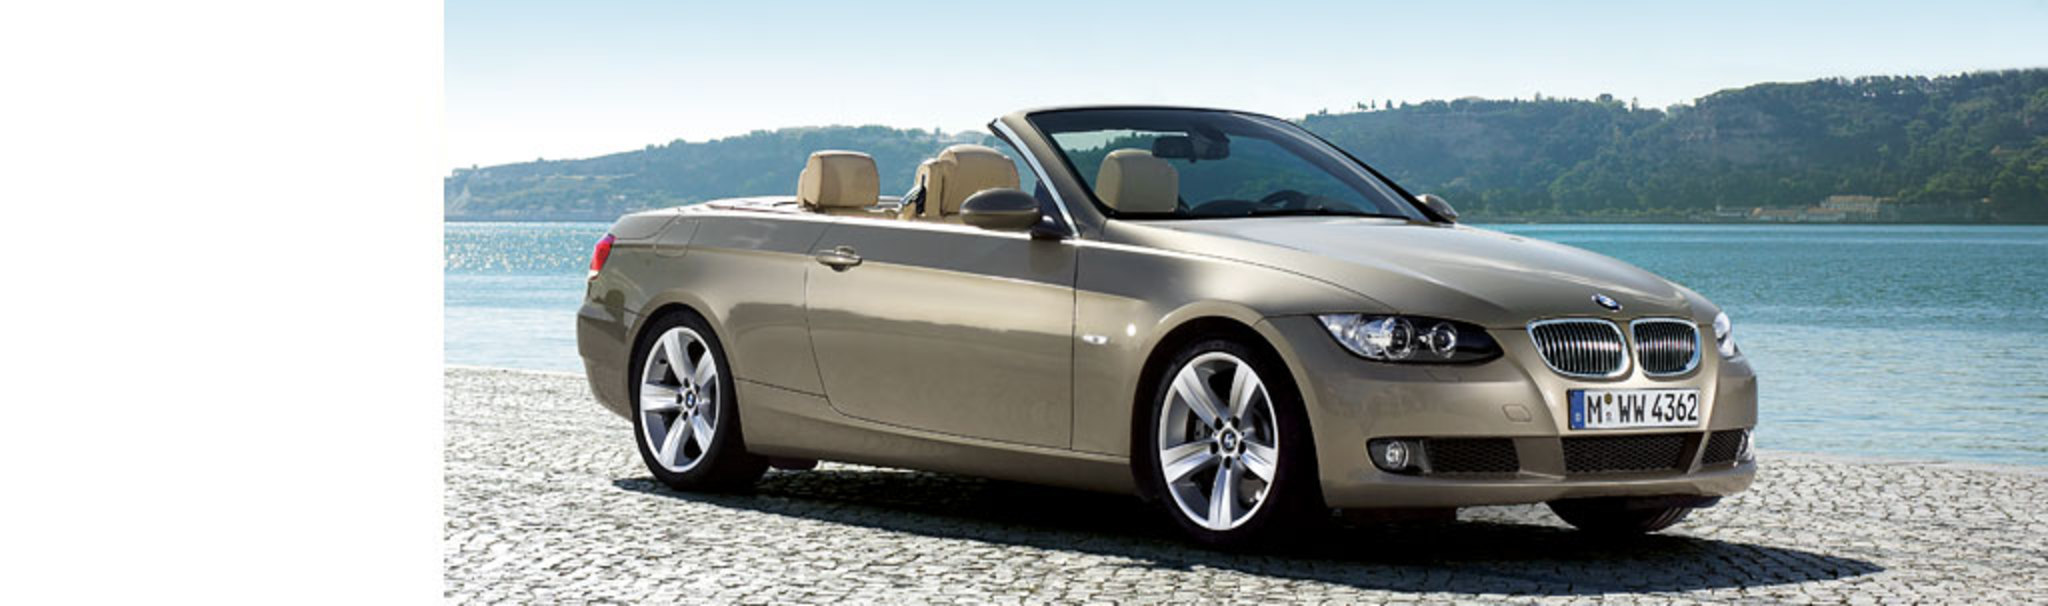 BMW 320 i Cabrio. View Download Wallpaper. 1024x303. Comments